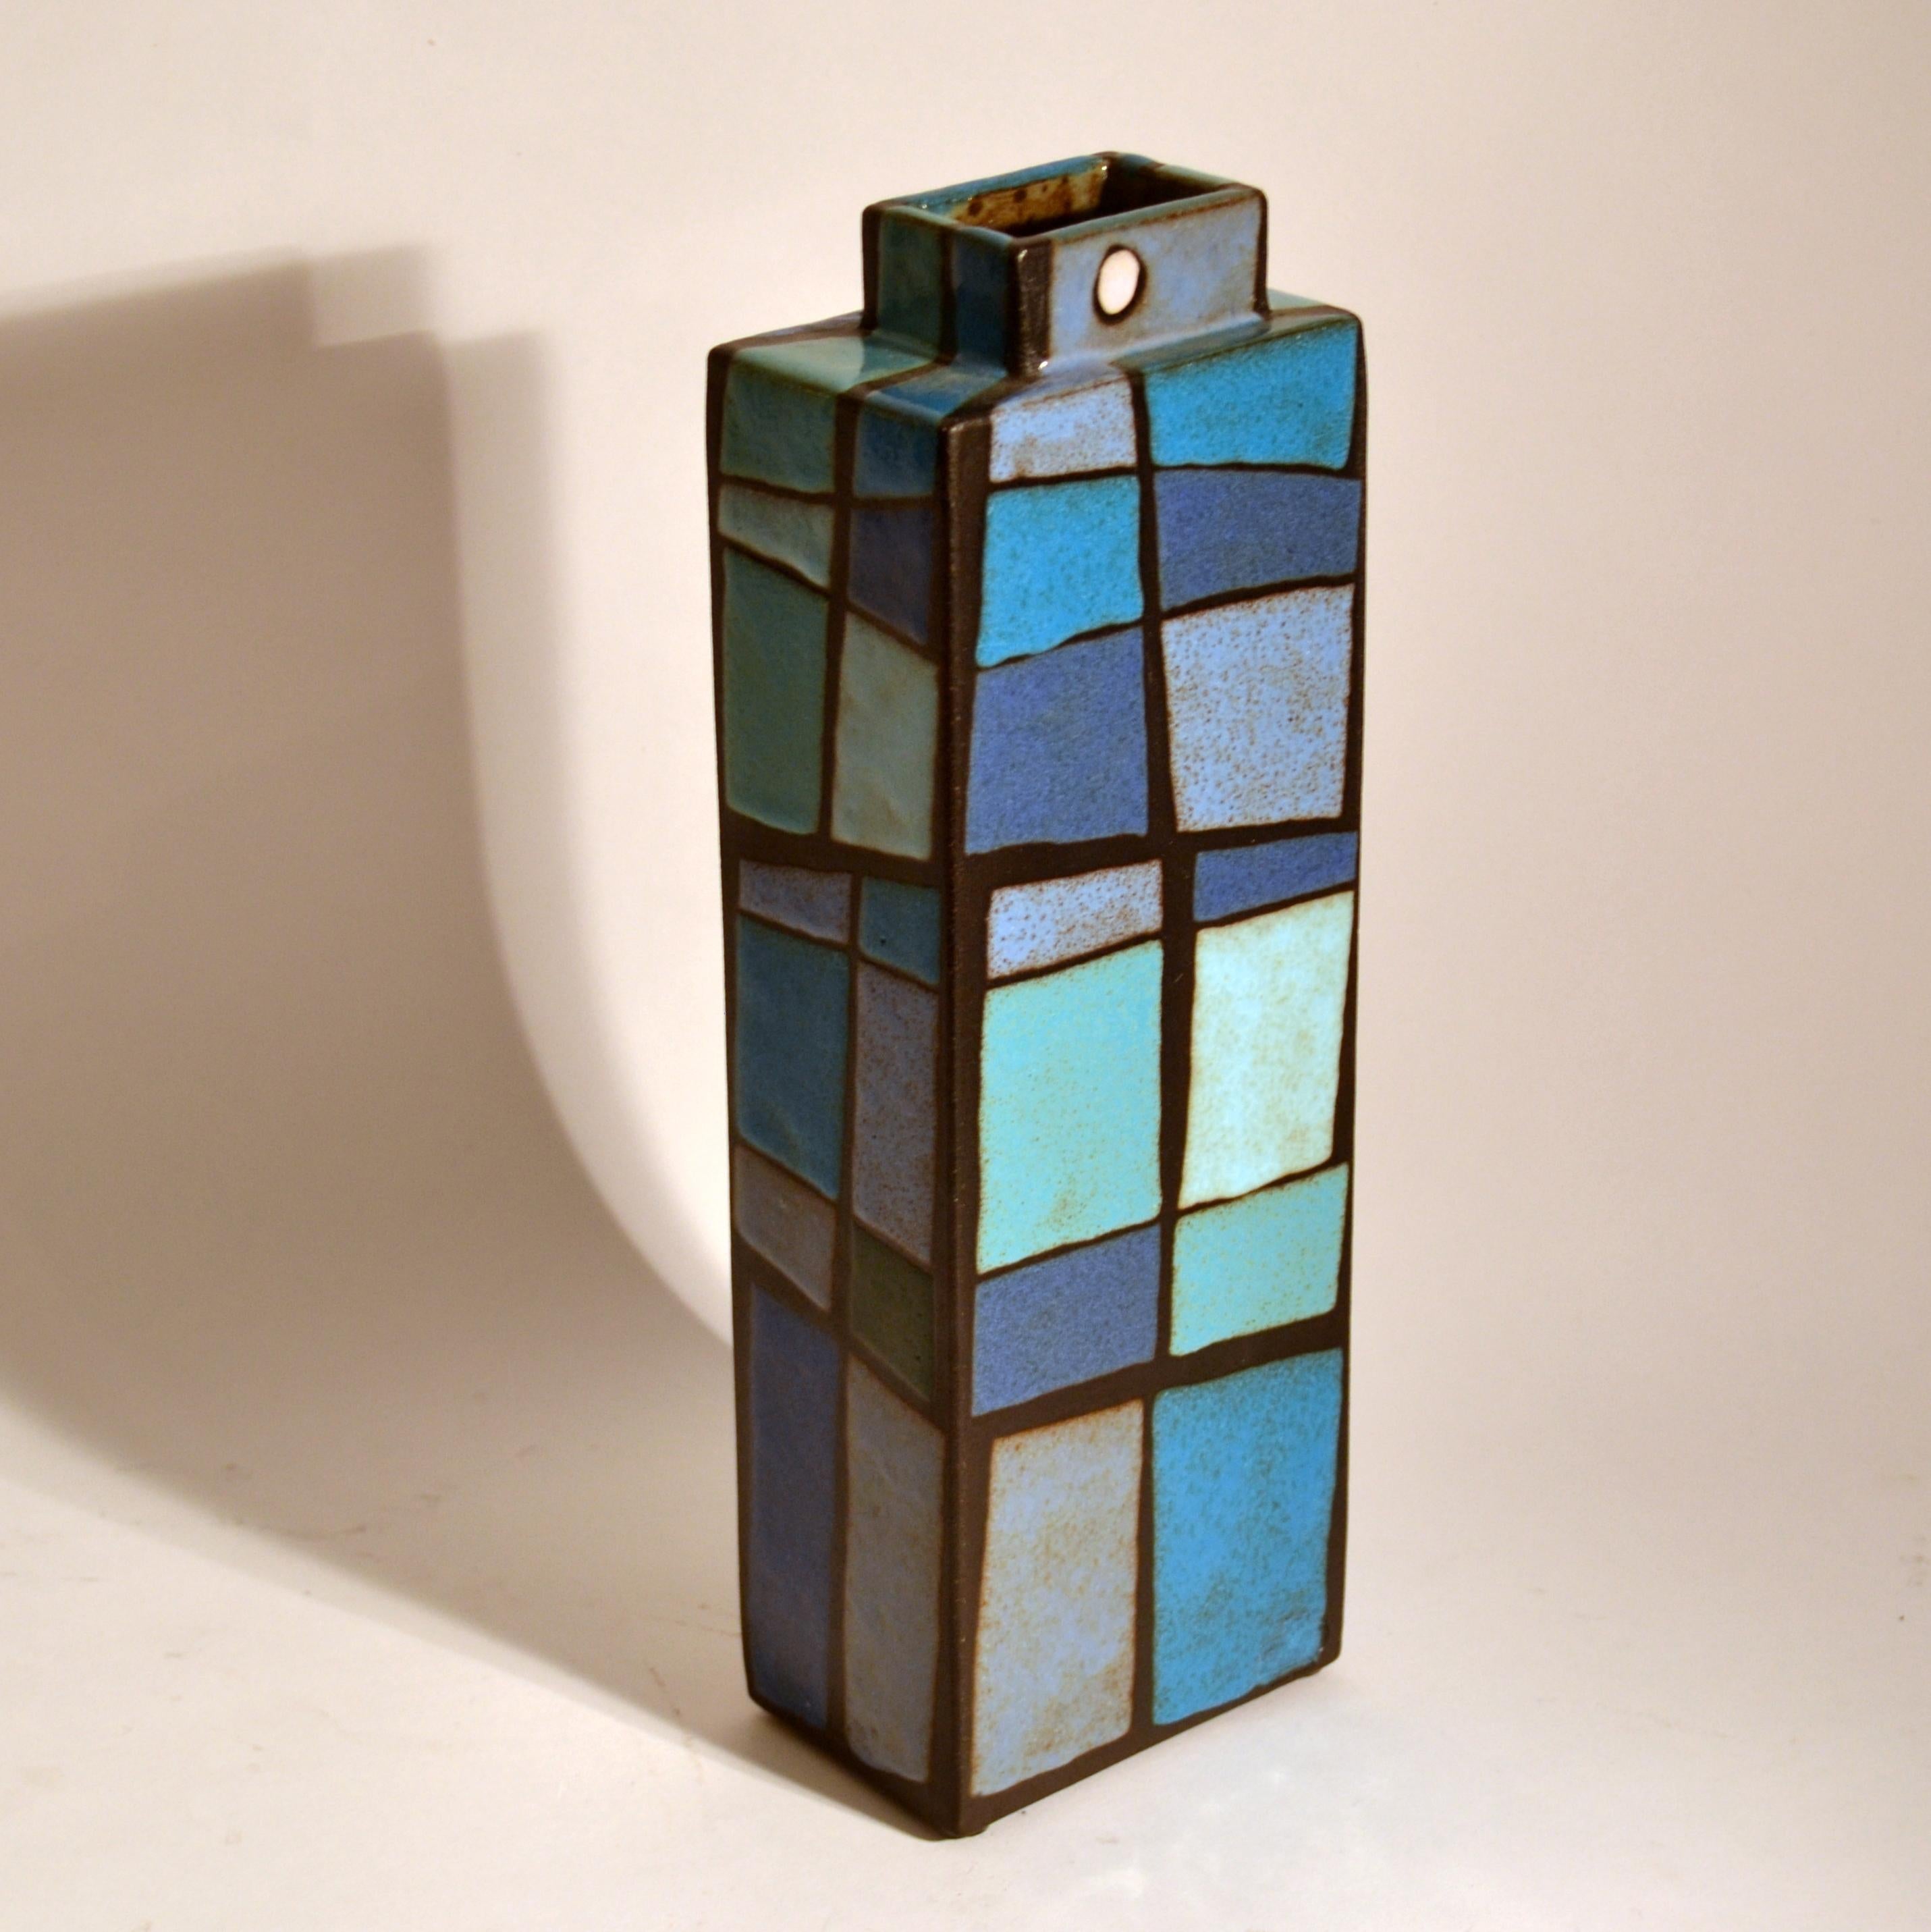 Rectangular studio pottery vase with a pattern in multi tones of blue and turquoise applied in blocks of colour on nearly black earthenware, signed Swano.